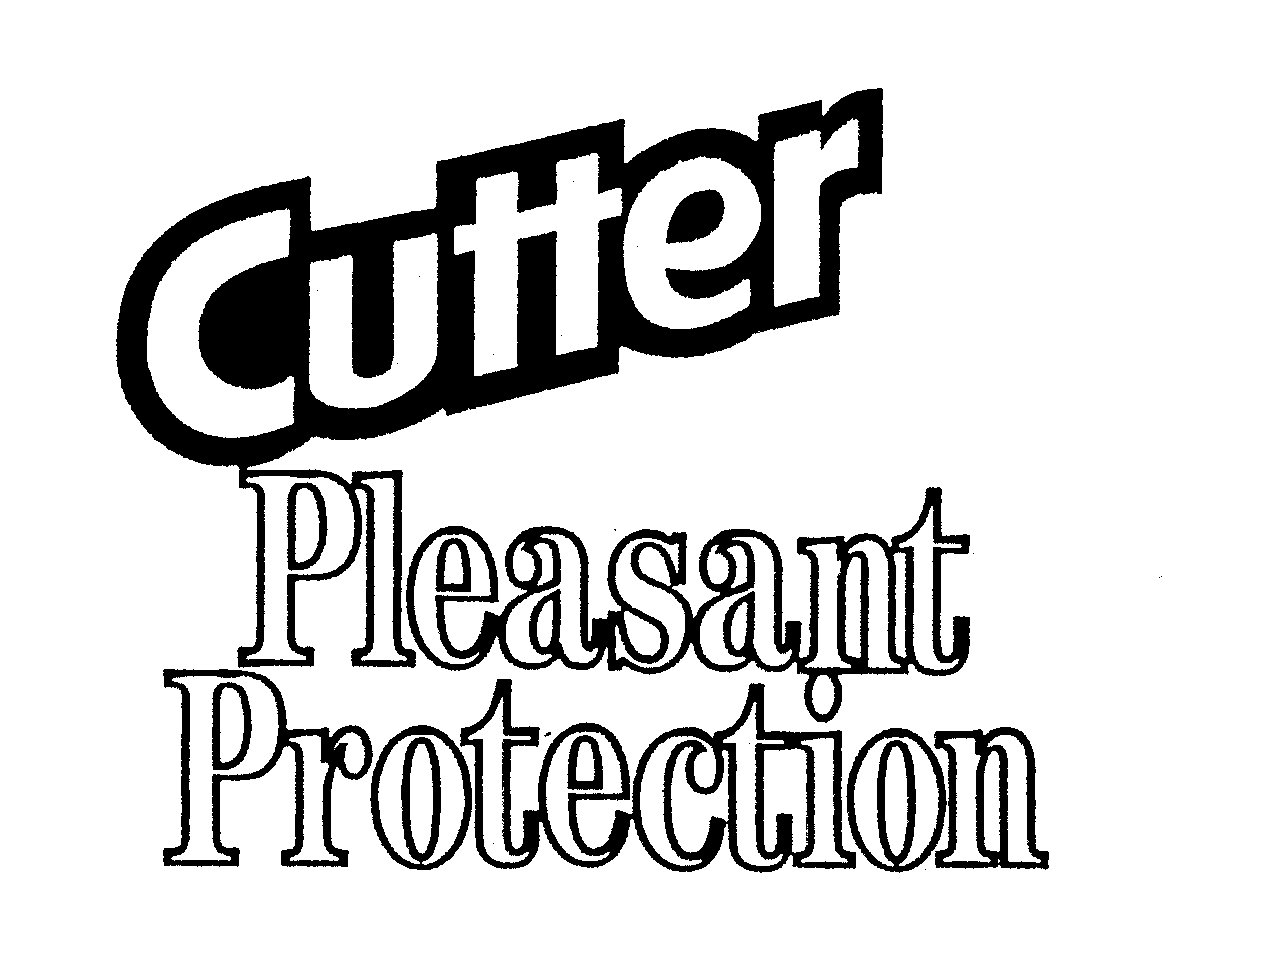  CUTTER PLEASANT PROTECTION